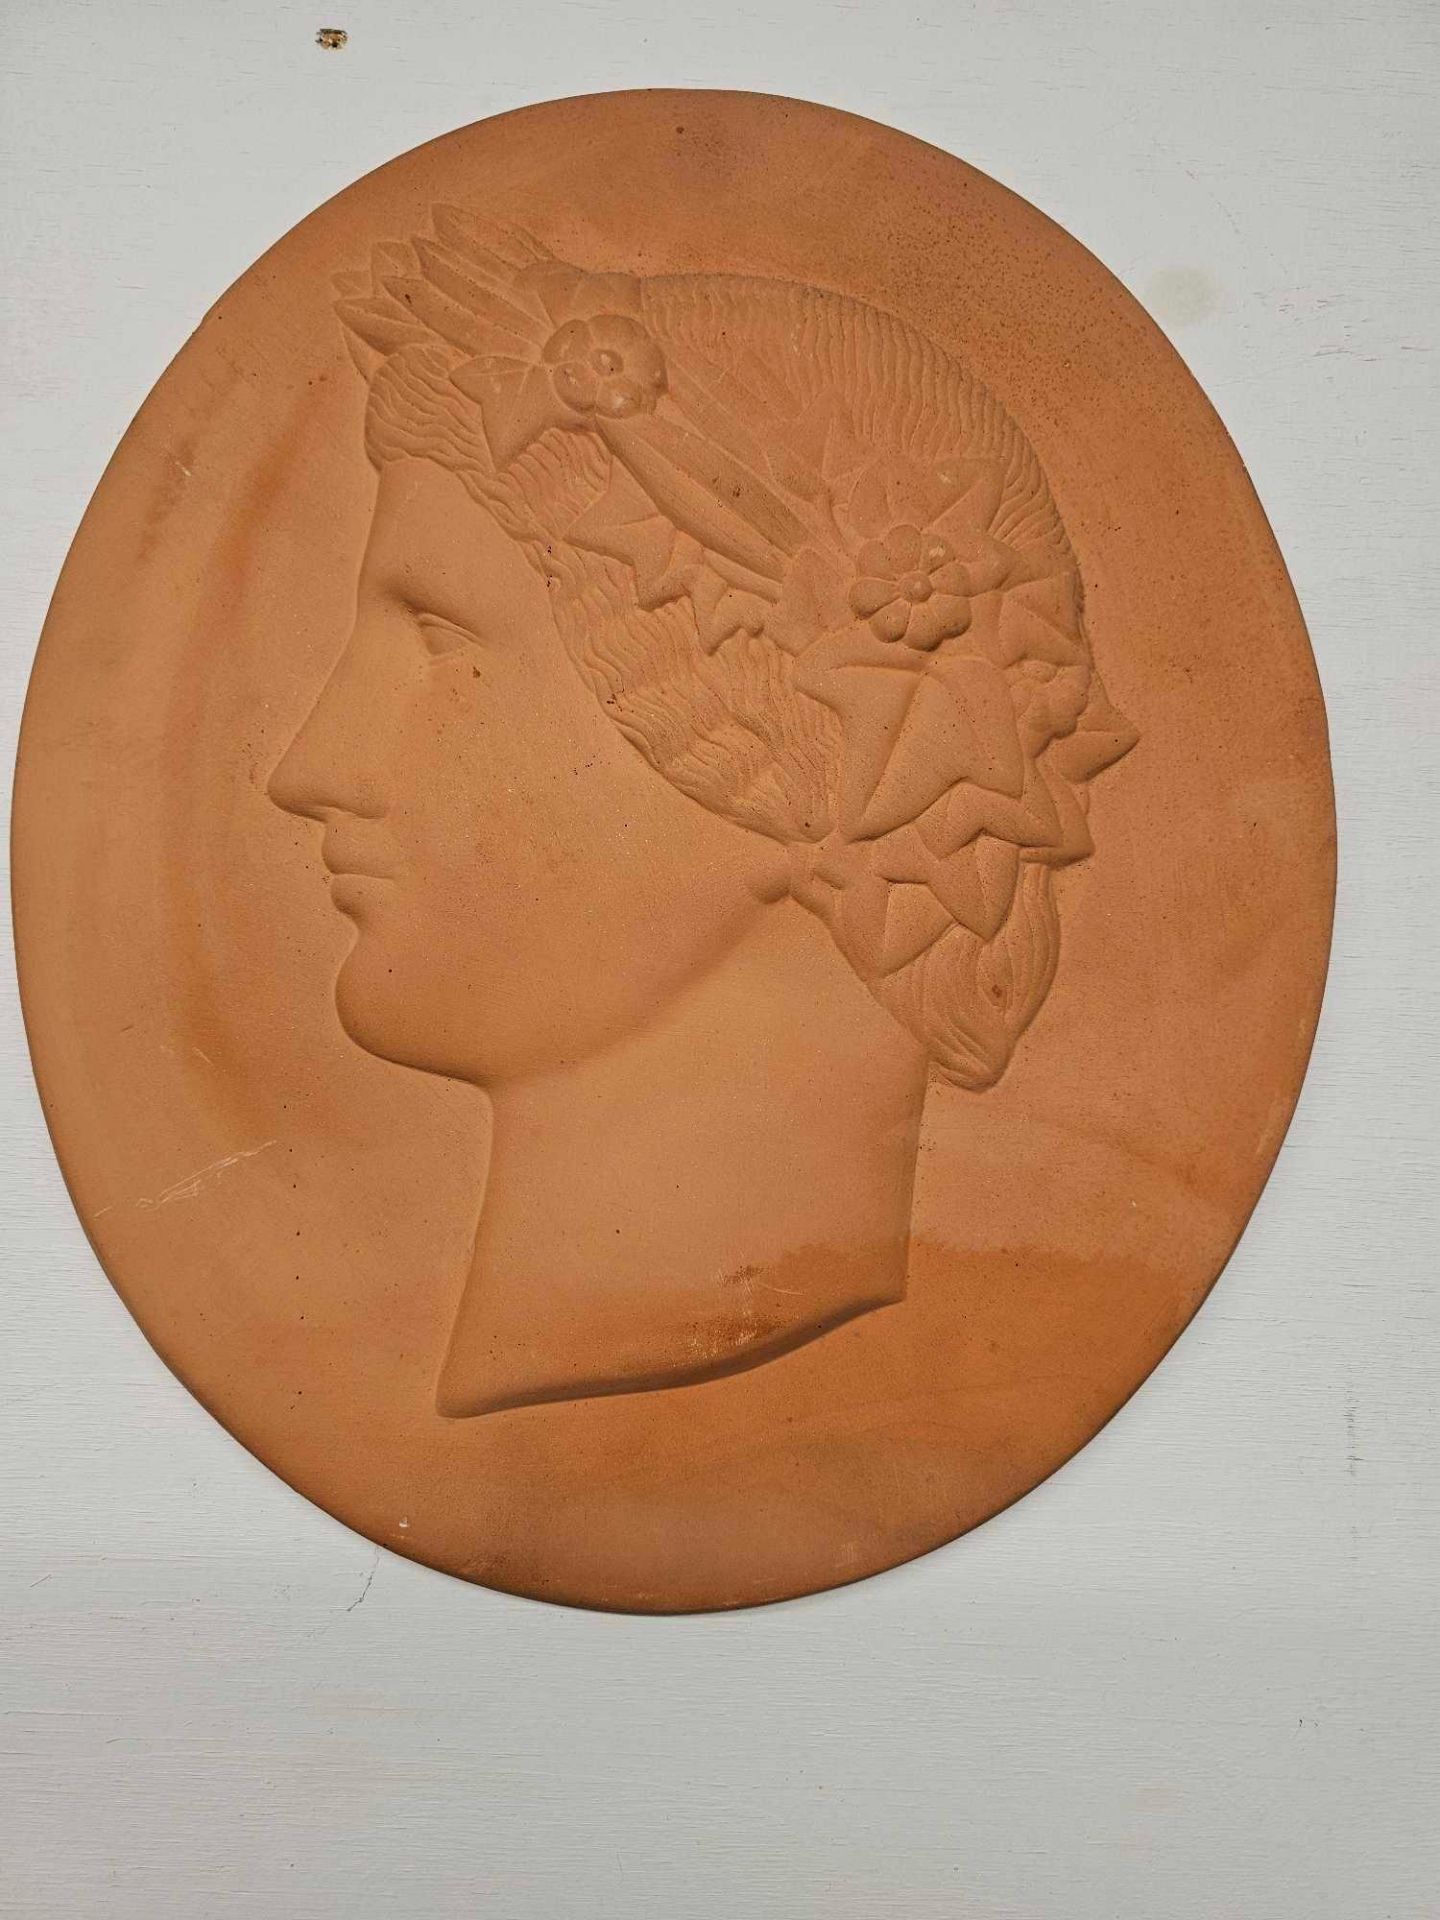 A Set Of 3 x Terracotta Wall Plaques Each With A Classic Relief Scene1 x 33 x 33 And 2 x 34 x 39cm - Image 3 of 6